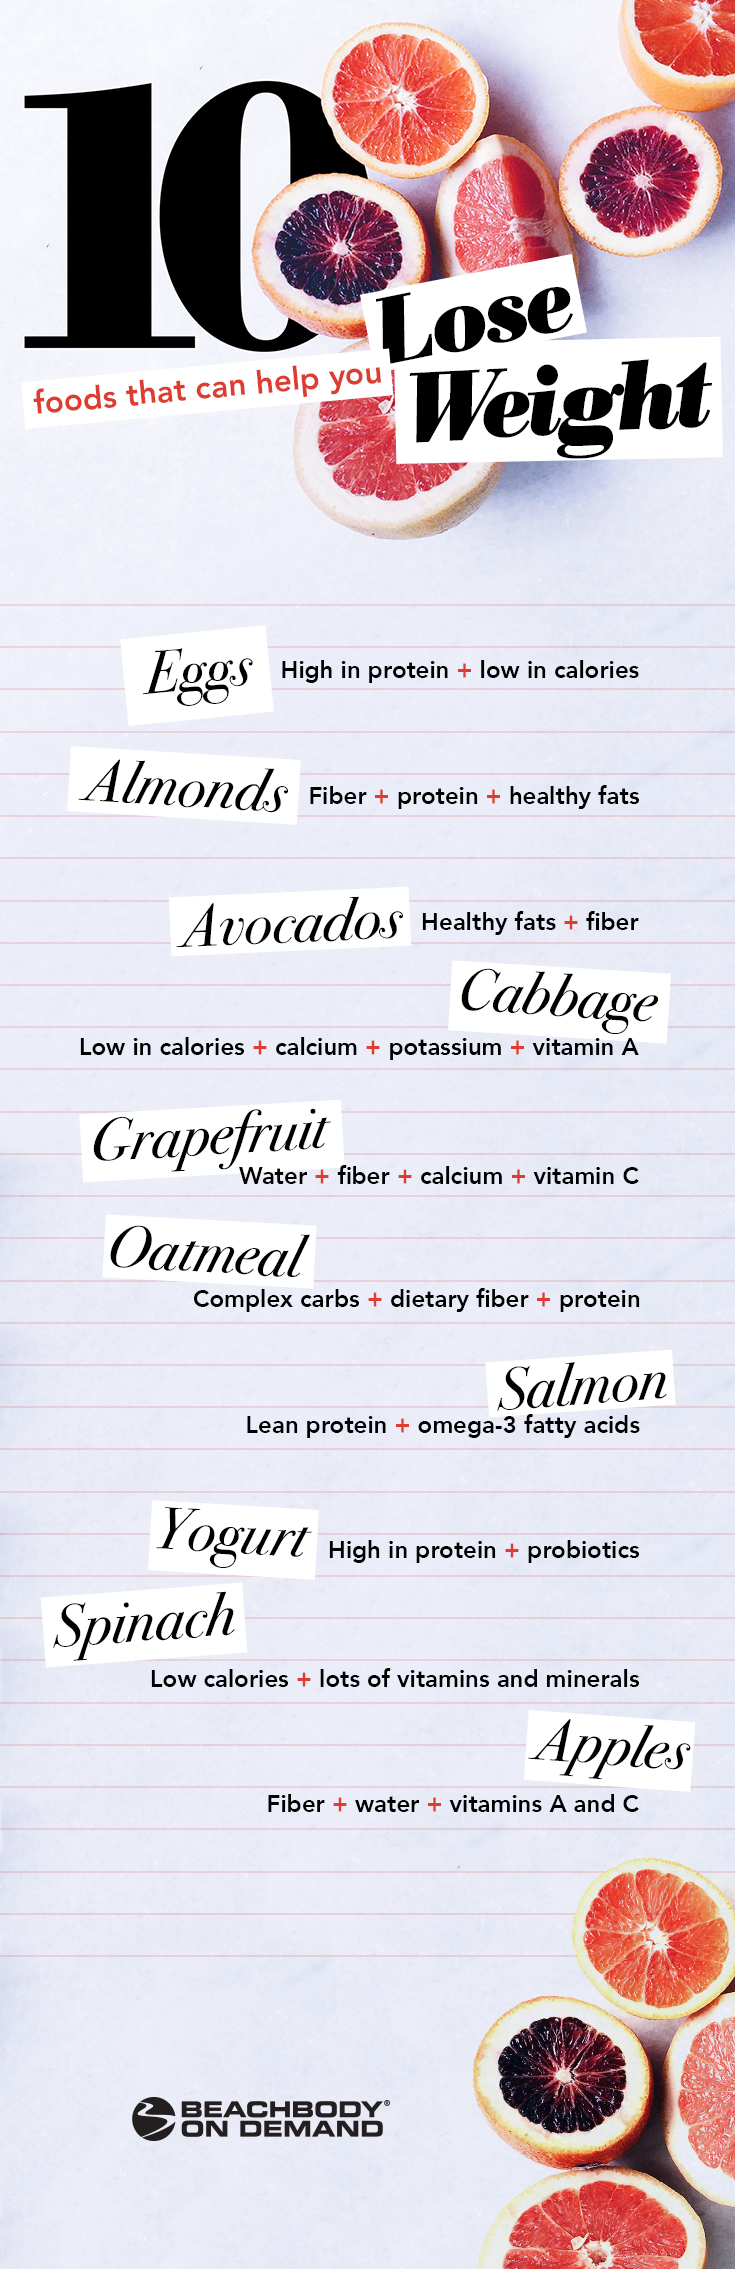 Top 10 Foods To Help You Lose Weight Infographic